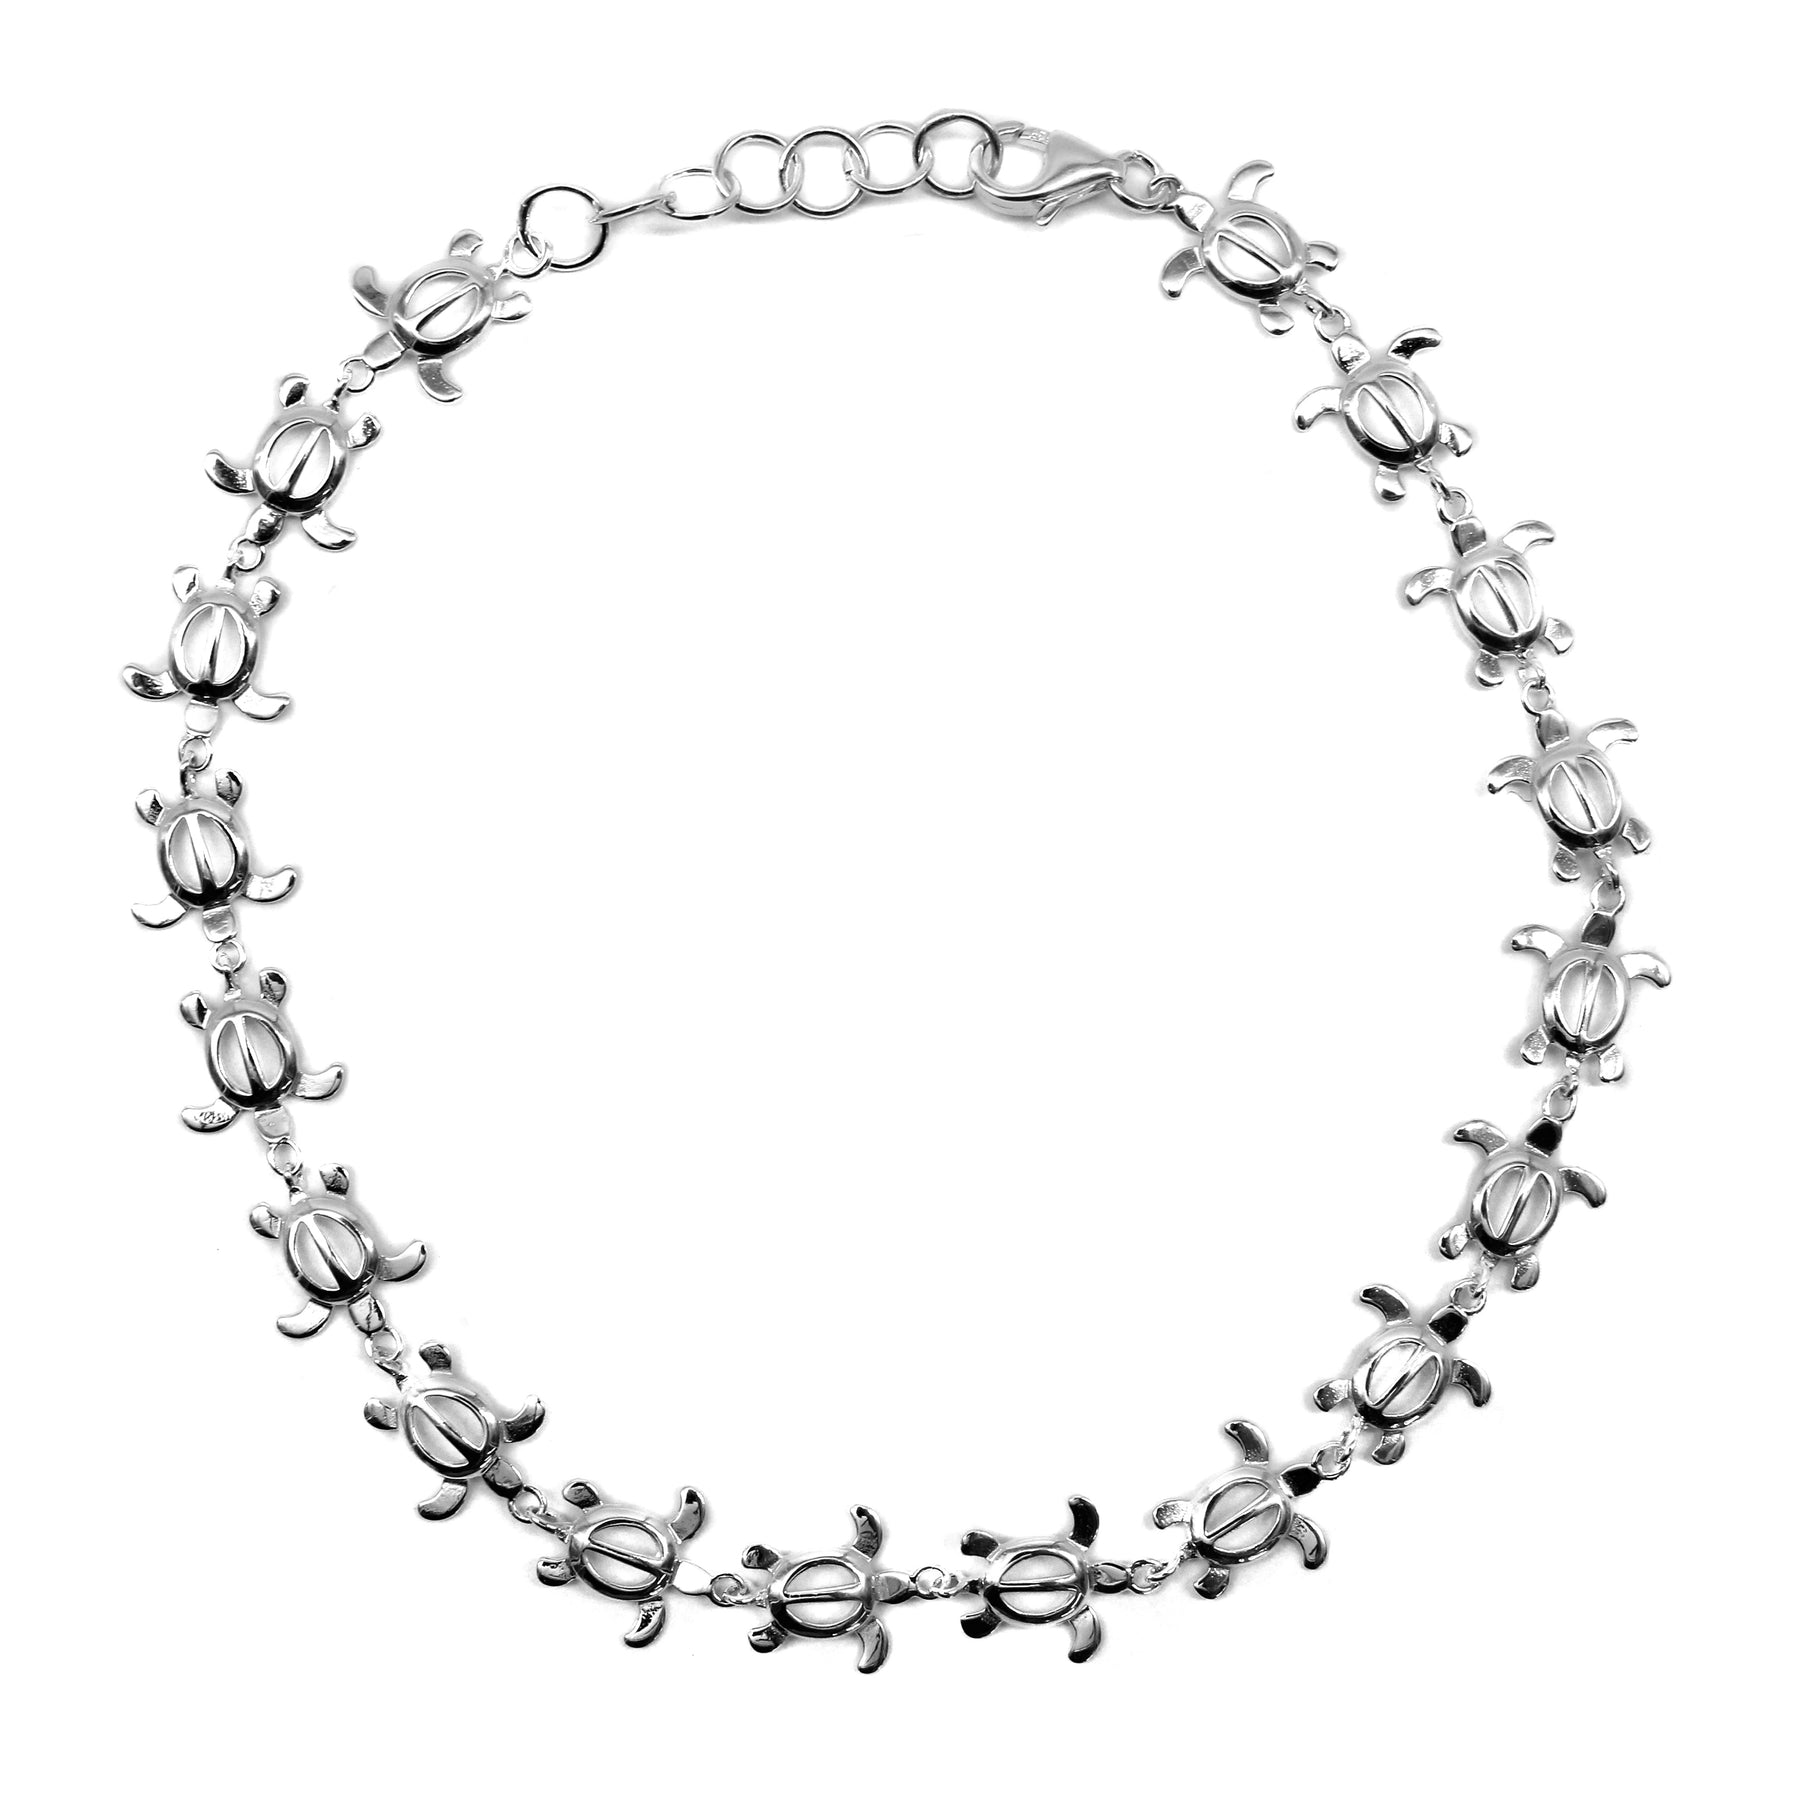 Women's Sterling Silver Anklet Foot Chain with Honu Turtles in Silver ...